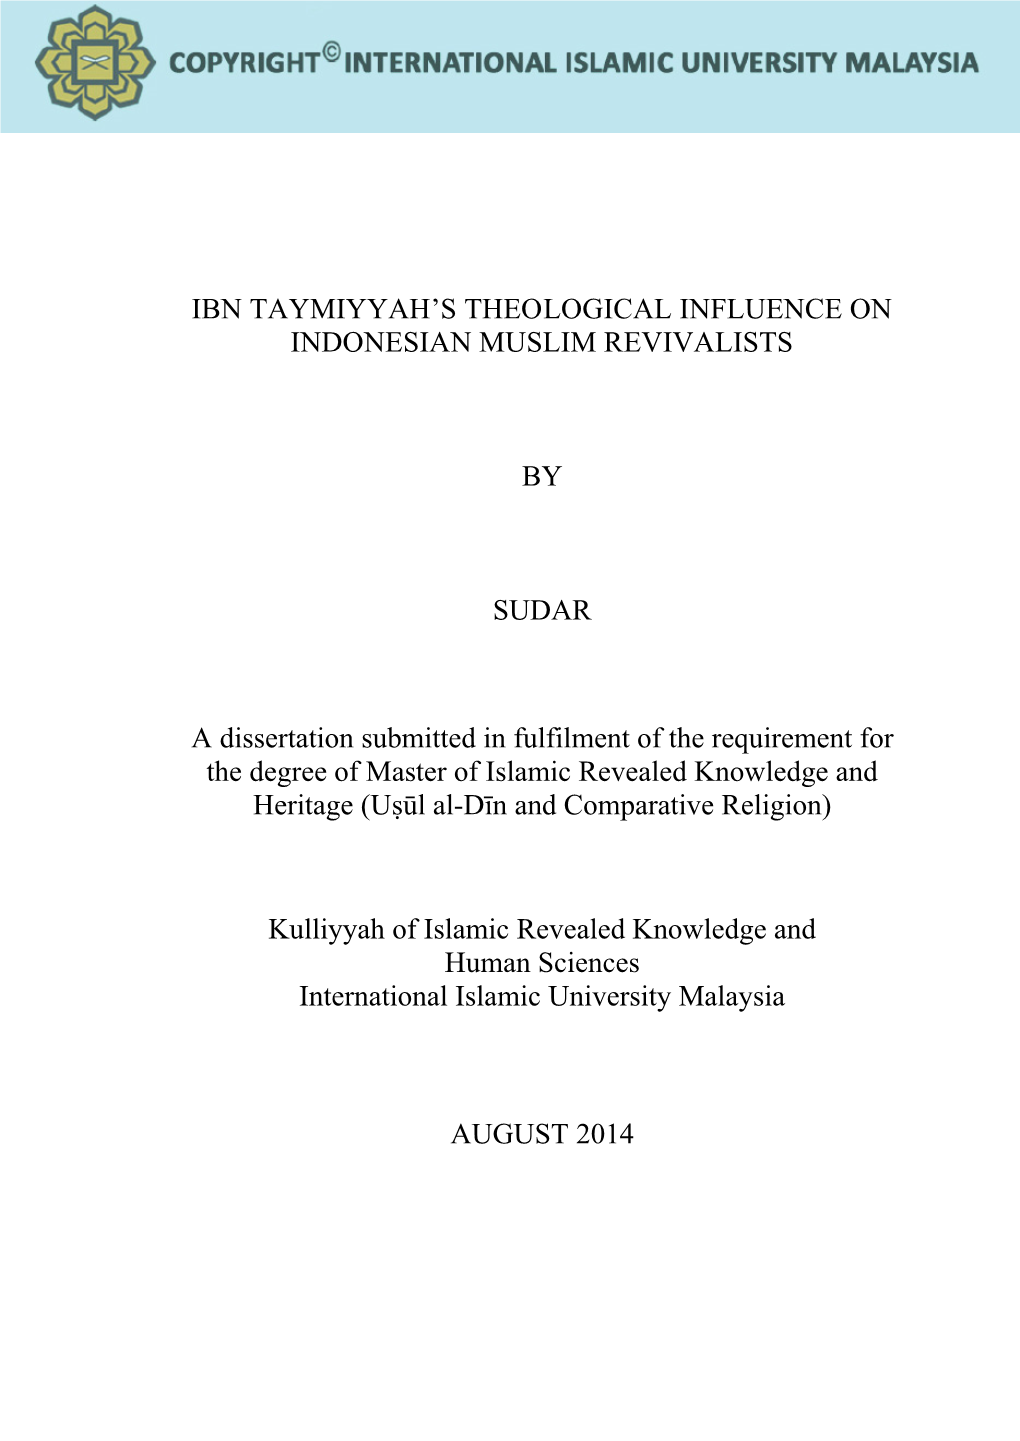 Ibn Taymiyyah's Theological Influence on Indonesian